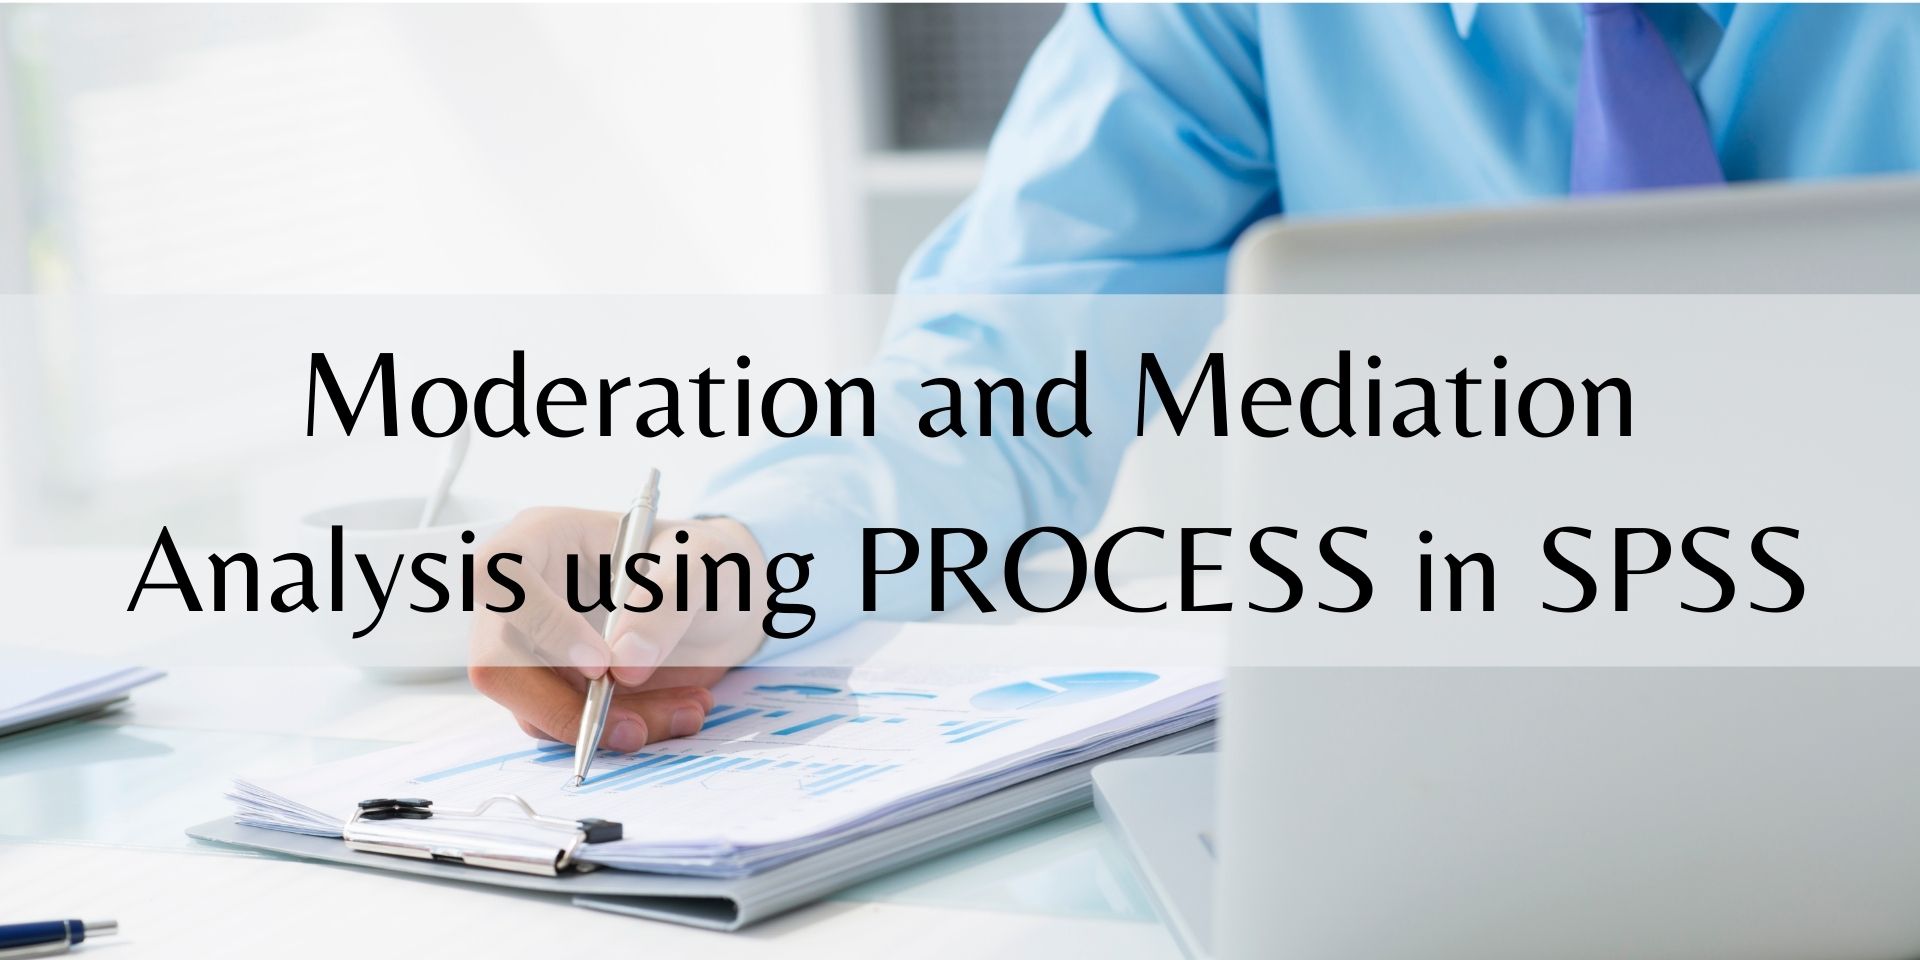 Moderation and Mediation Analysis using PROCESS in SPSS